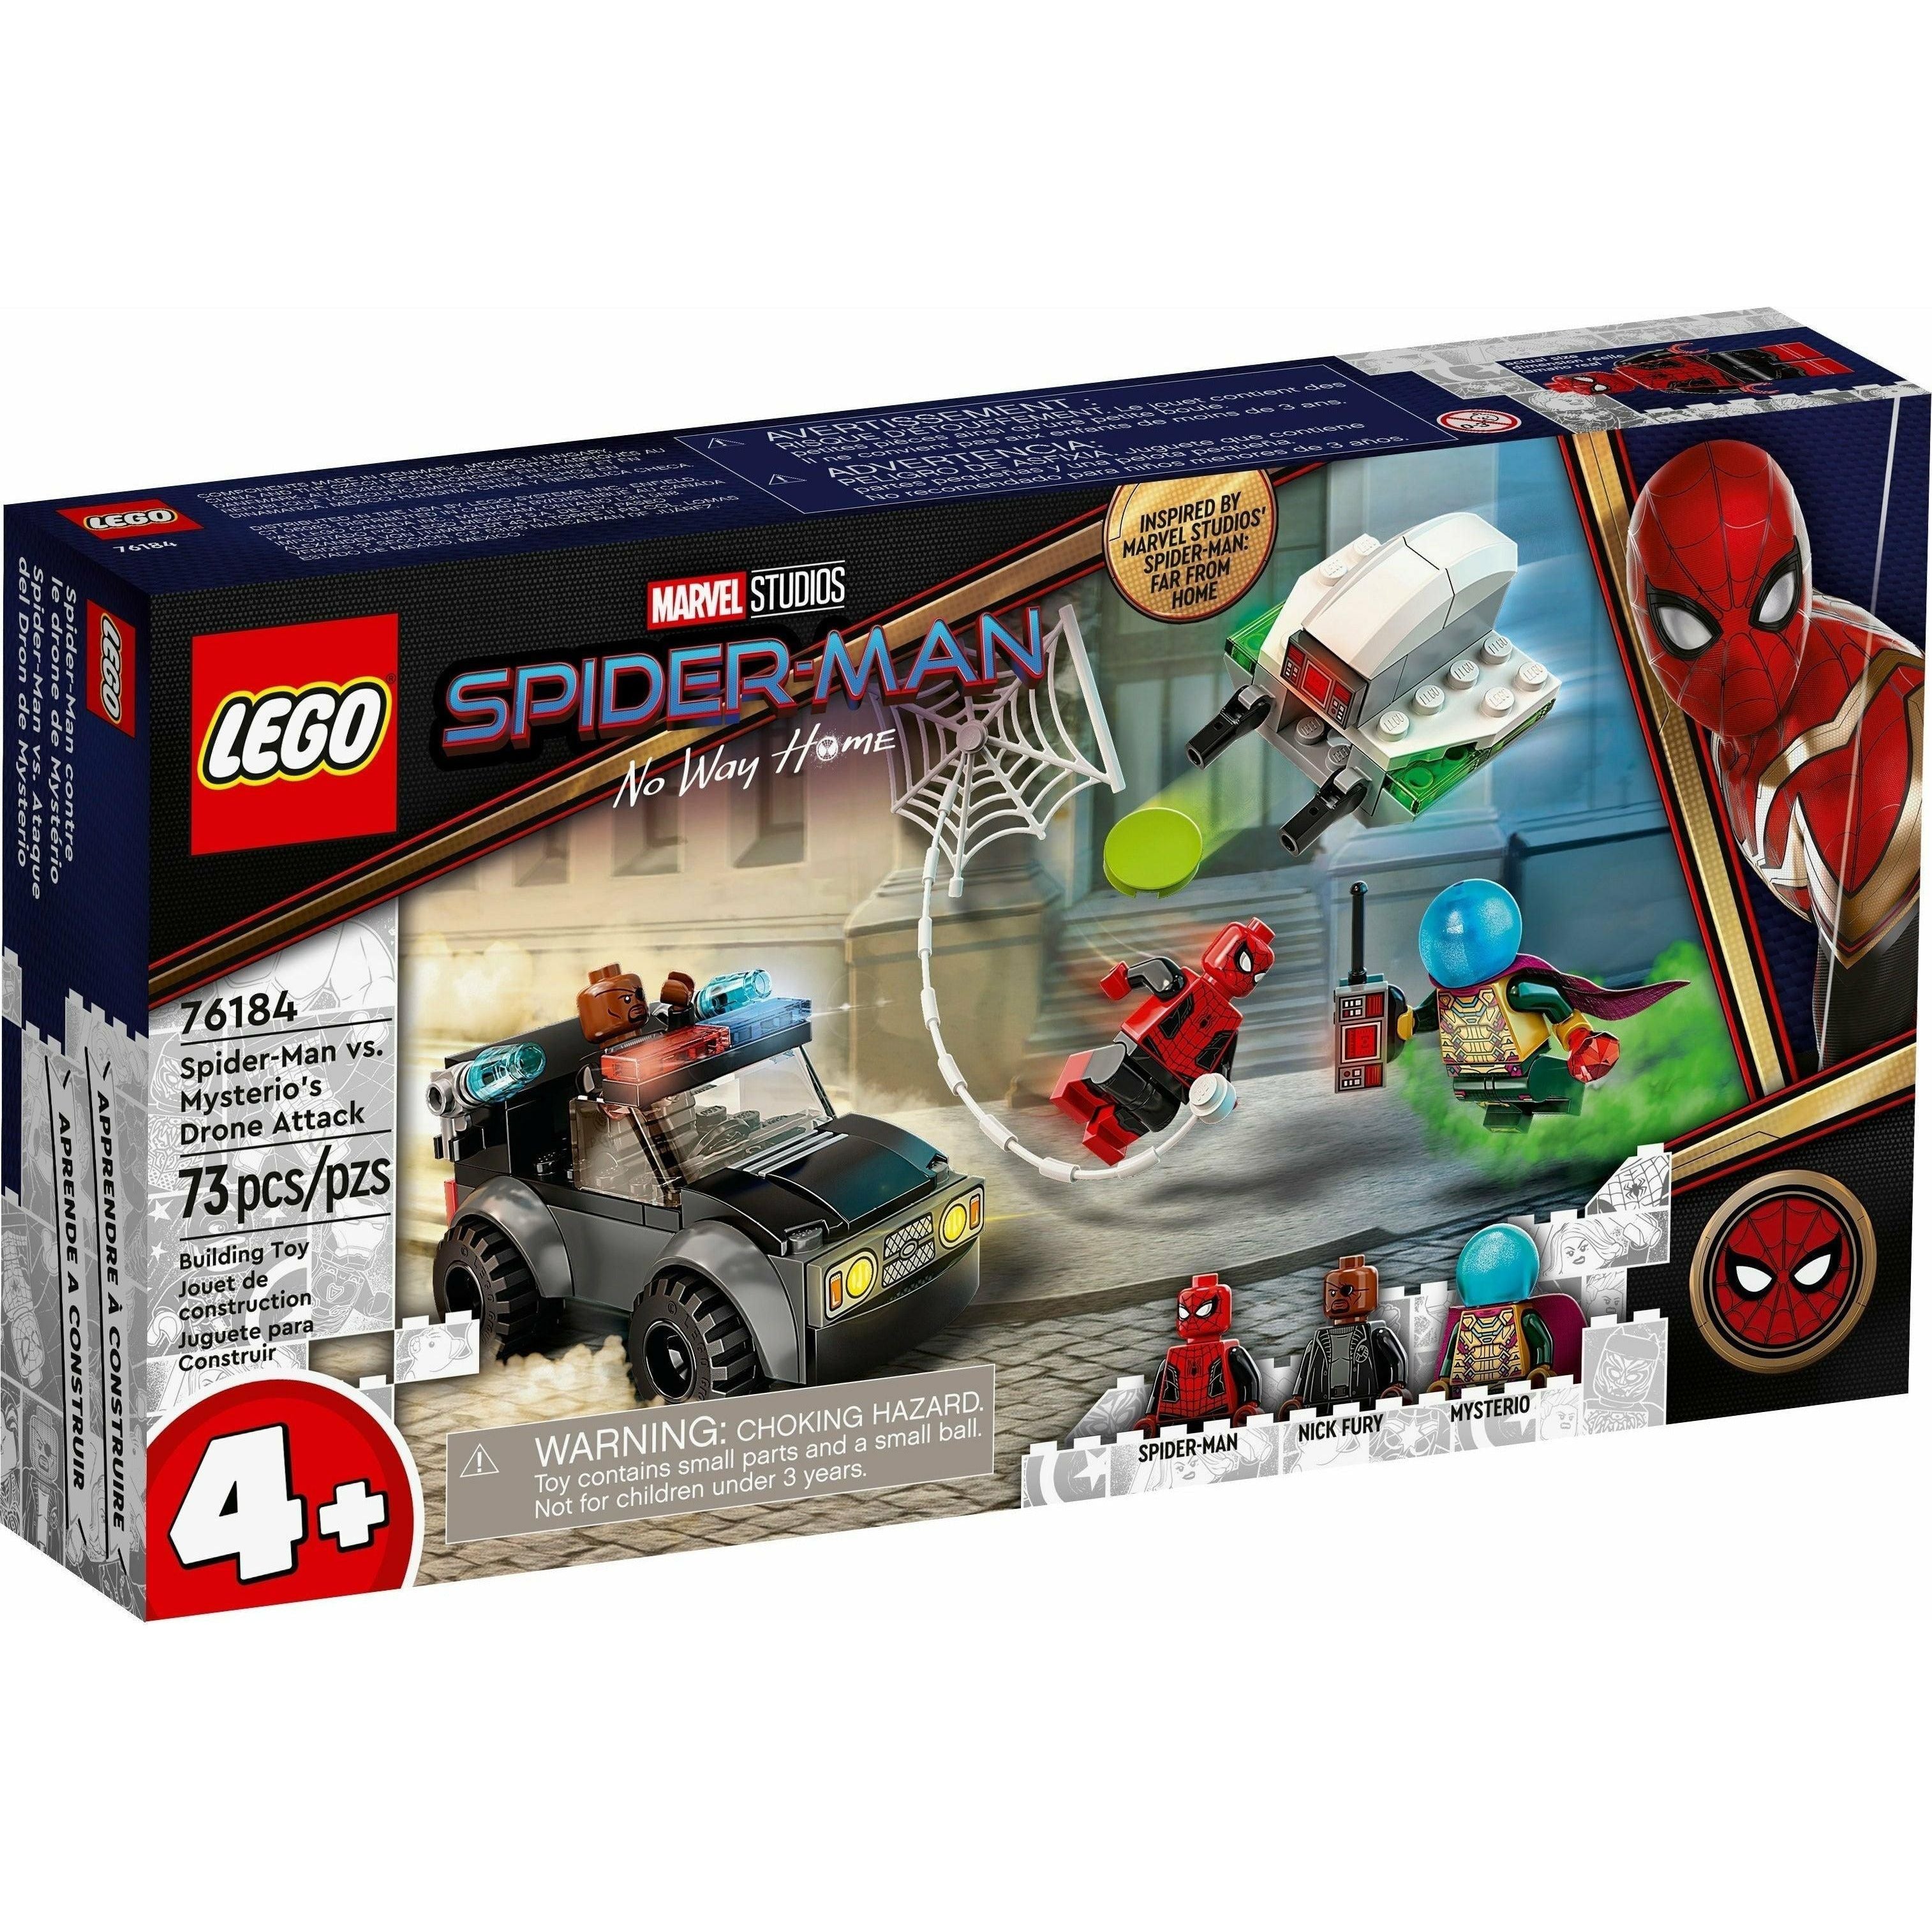 LEGO Marvel Spider-Man vs. Mysterio’s Drone Attack 76184 Building Kit (73 Pieces) - BumbleToys - 5-7 Years, Boys, LEGO, Marvel, OXE, Pre-Order, Spider man, Spiderman